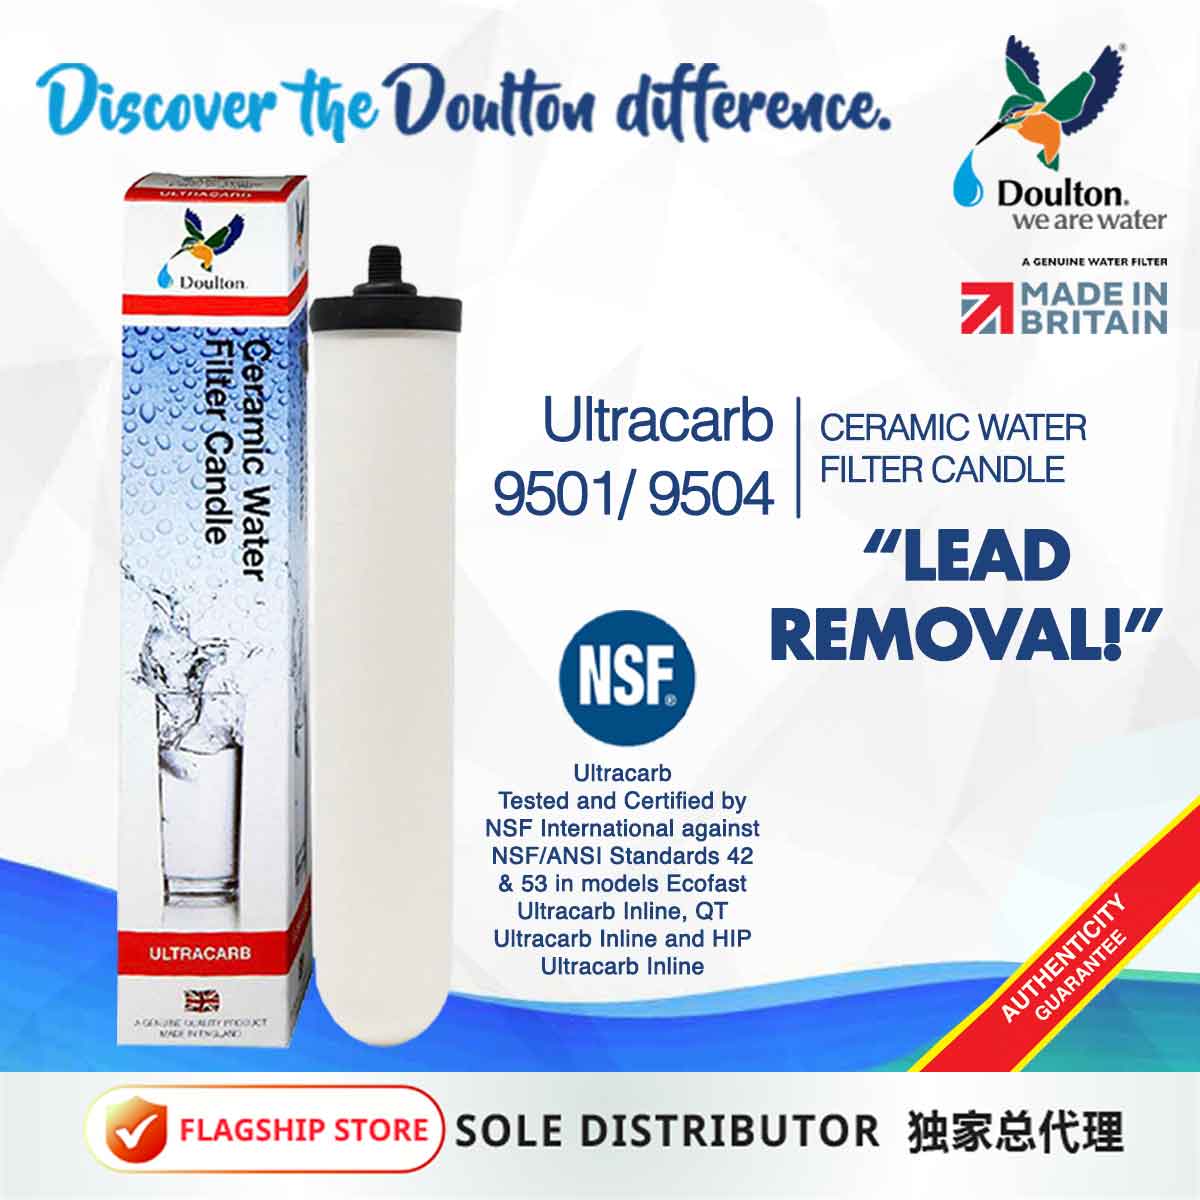 Doulton QT Ecofast+UCC (NSF) *FREE Installation! Limited time offer! Waived off S$150 installation!